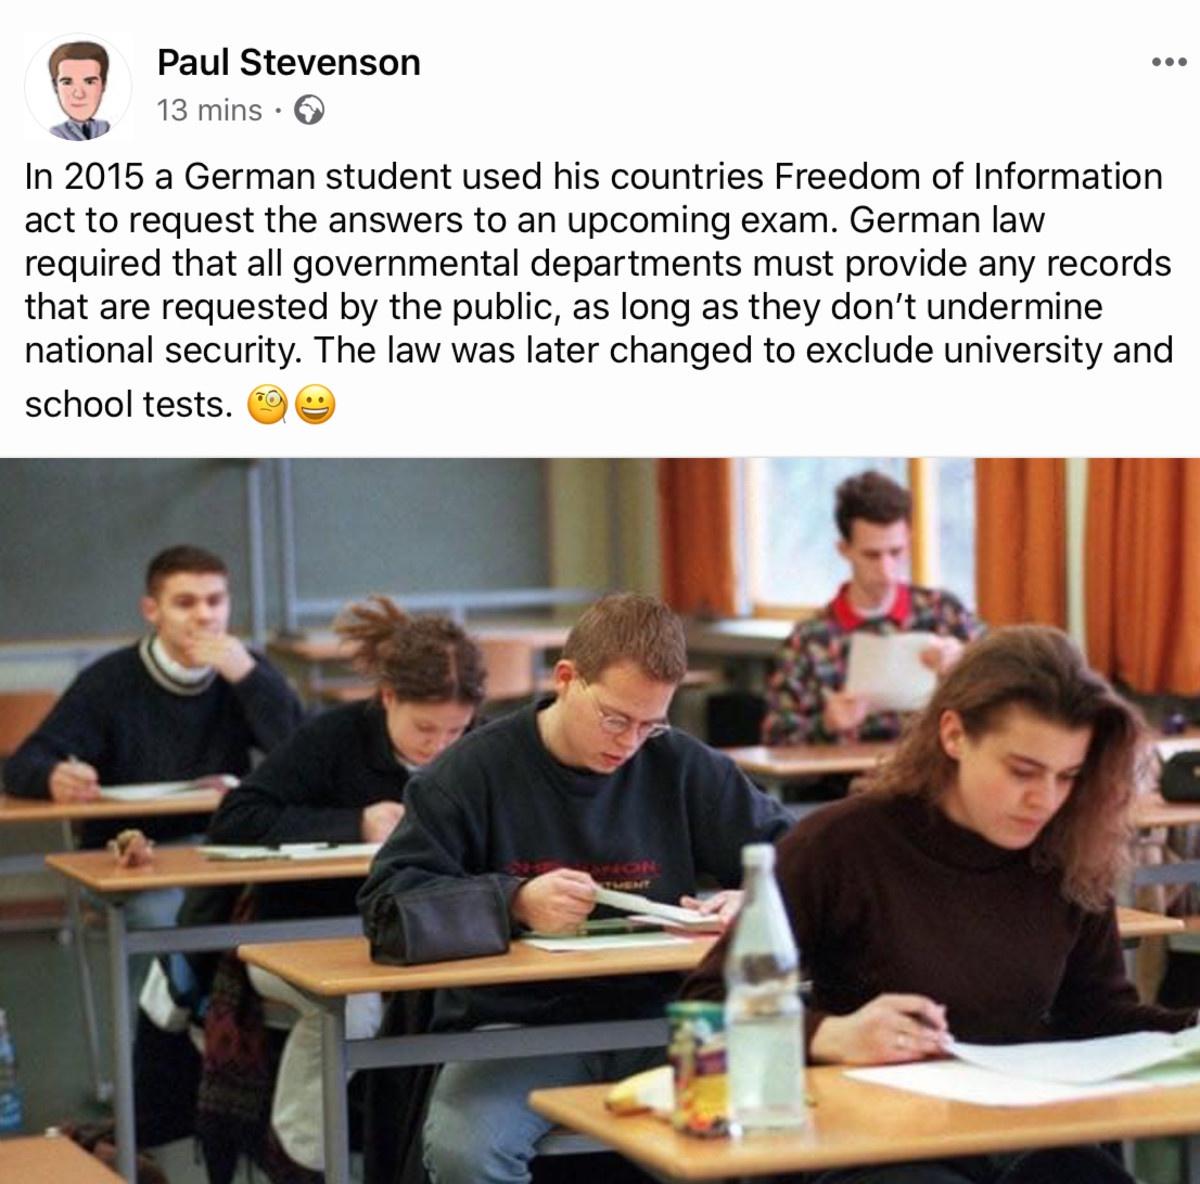 education - Paul Stevenson 13 mins In 2015 a German student used his countries Freedom of Information act to request the answers to an upcoming exam. German law required that all governmental departments must provide any records that are requested by the 